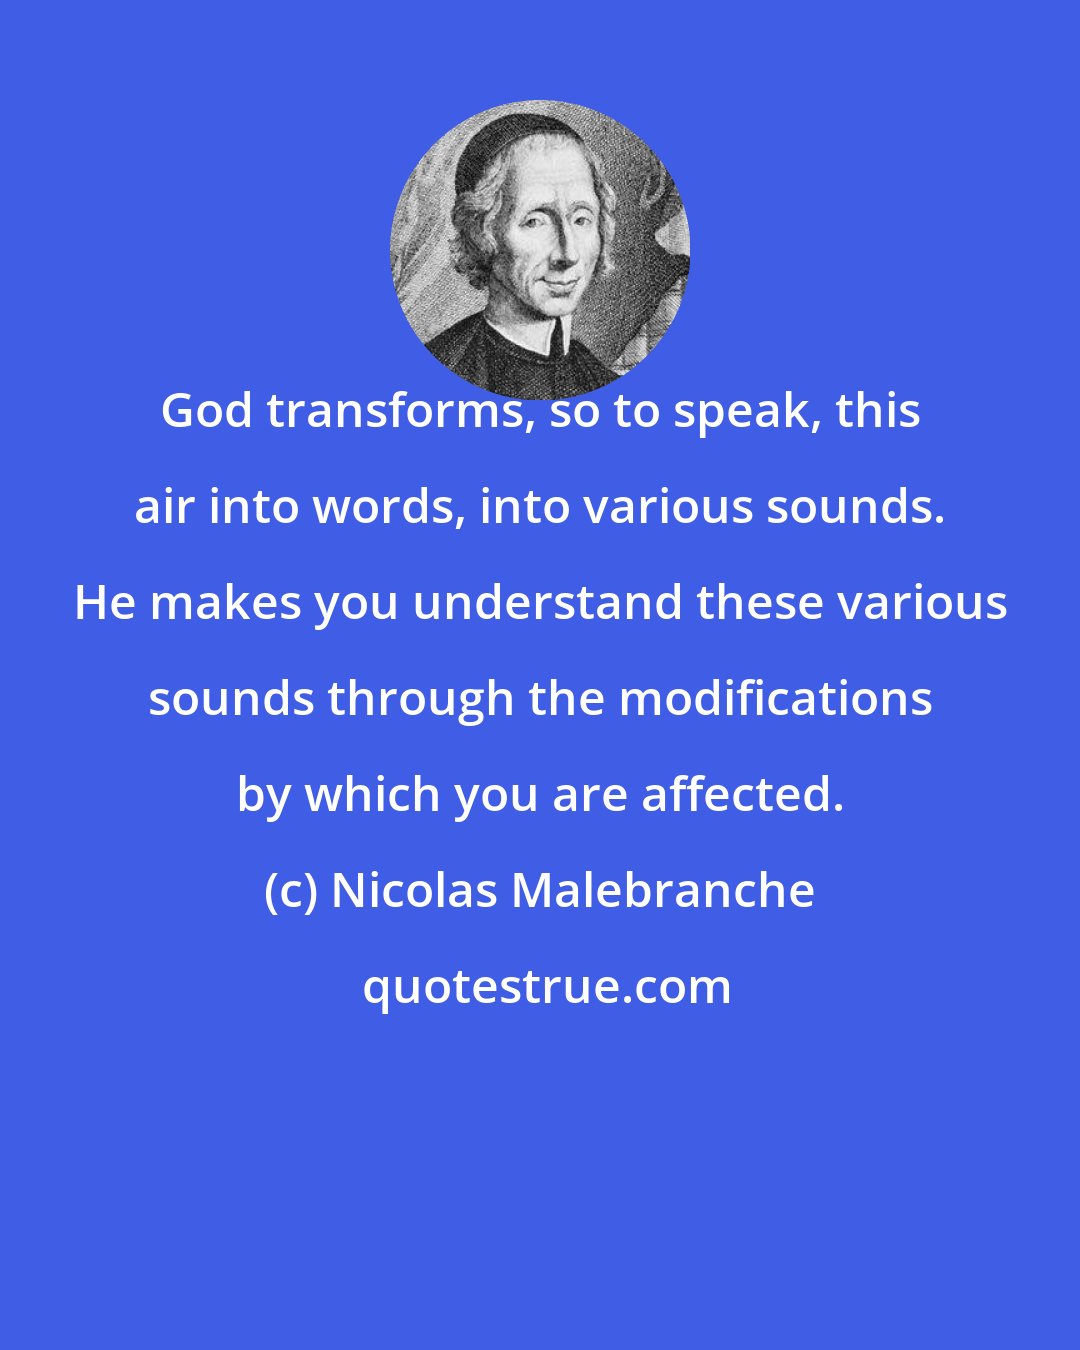 Nicolas Malebranche: God transforms, so to speak, this air into words, into various sounds. He makes you understand these various sounds through the modifications by which you are affected.